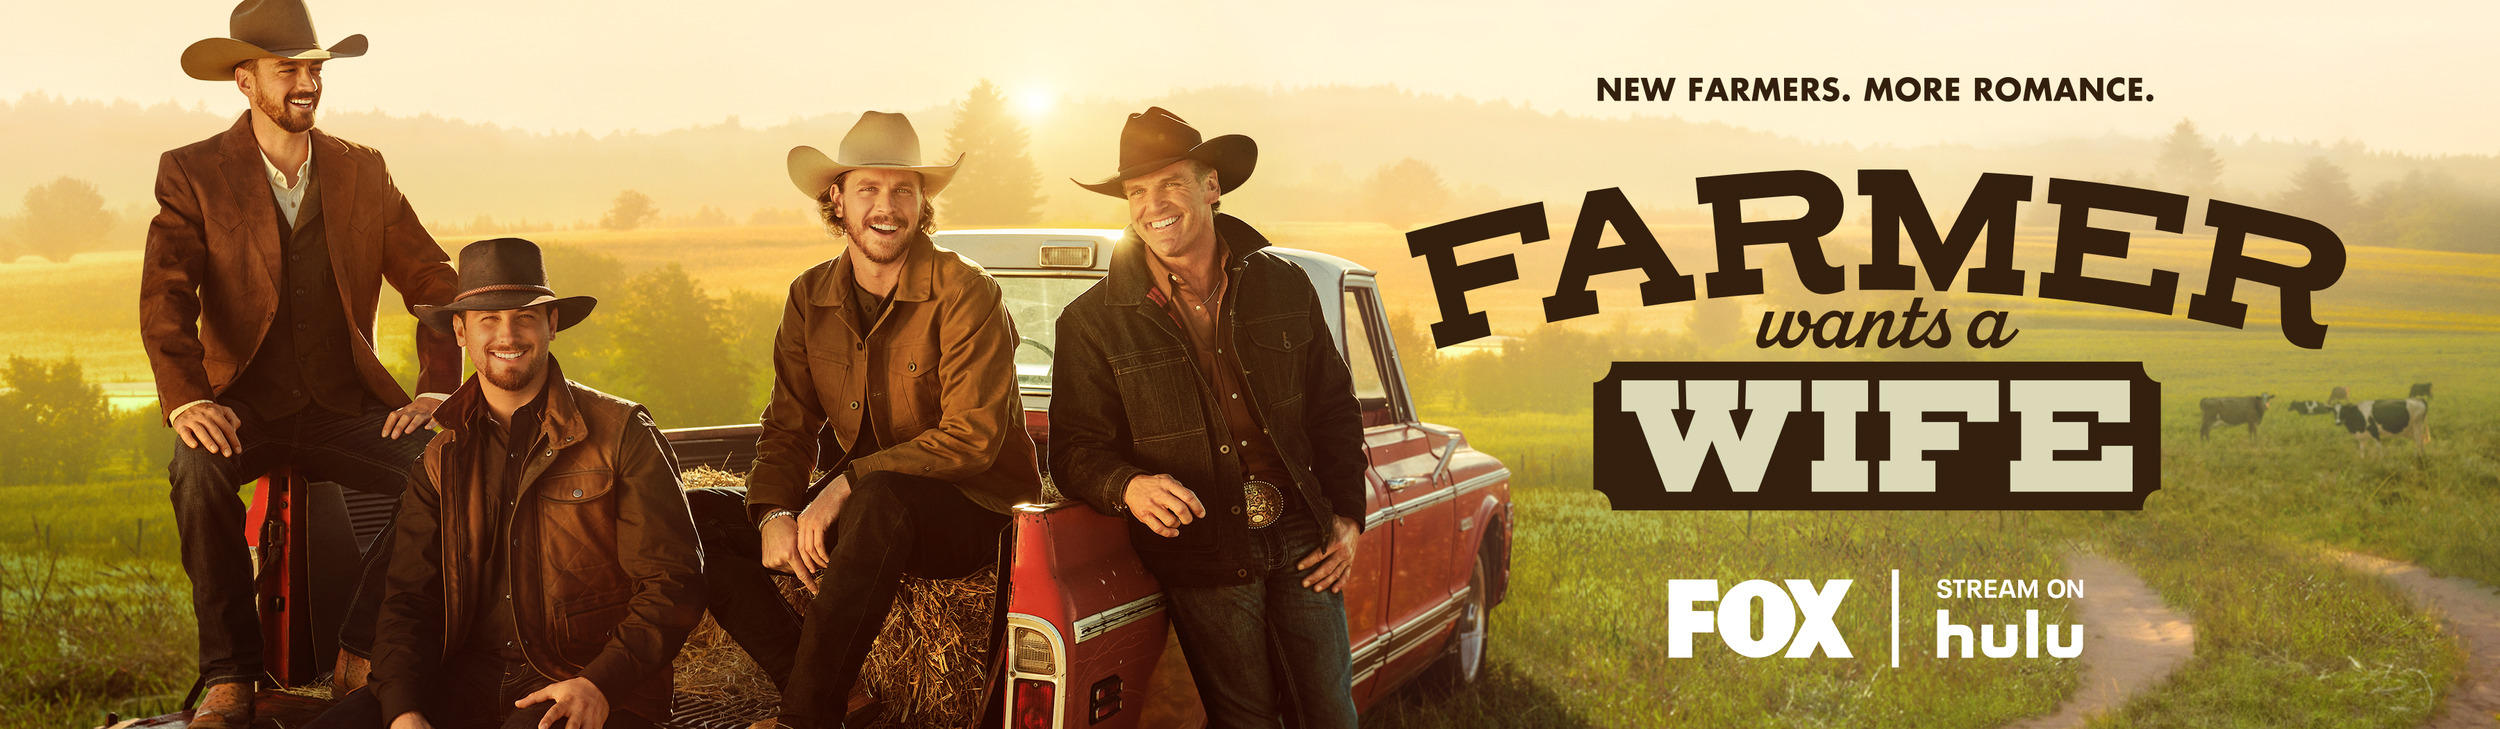 Mega Sized TV Poster Image for Farmer Wants A Wife (#3 of 3)